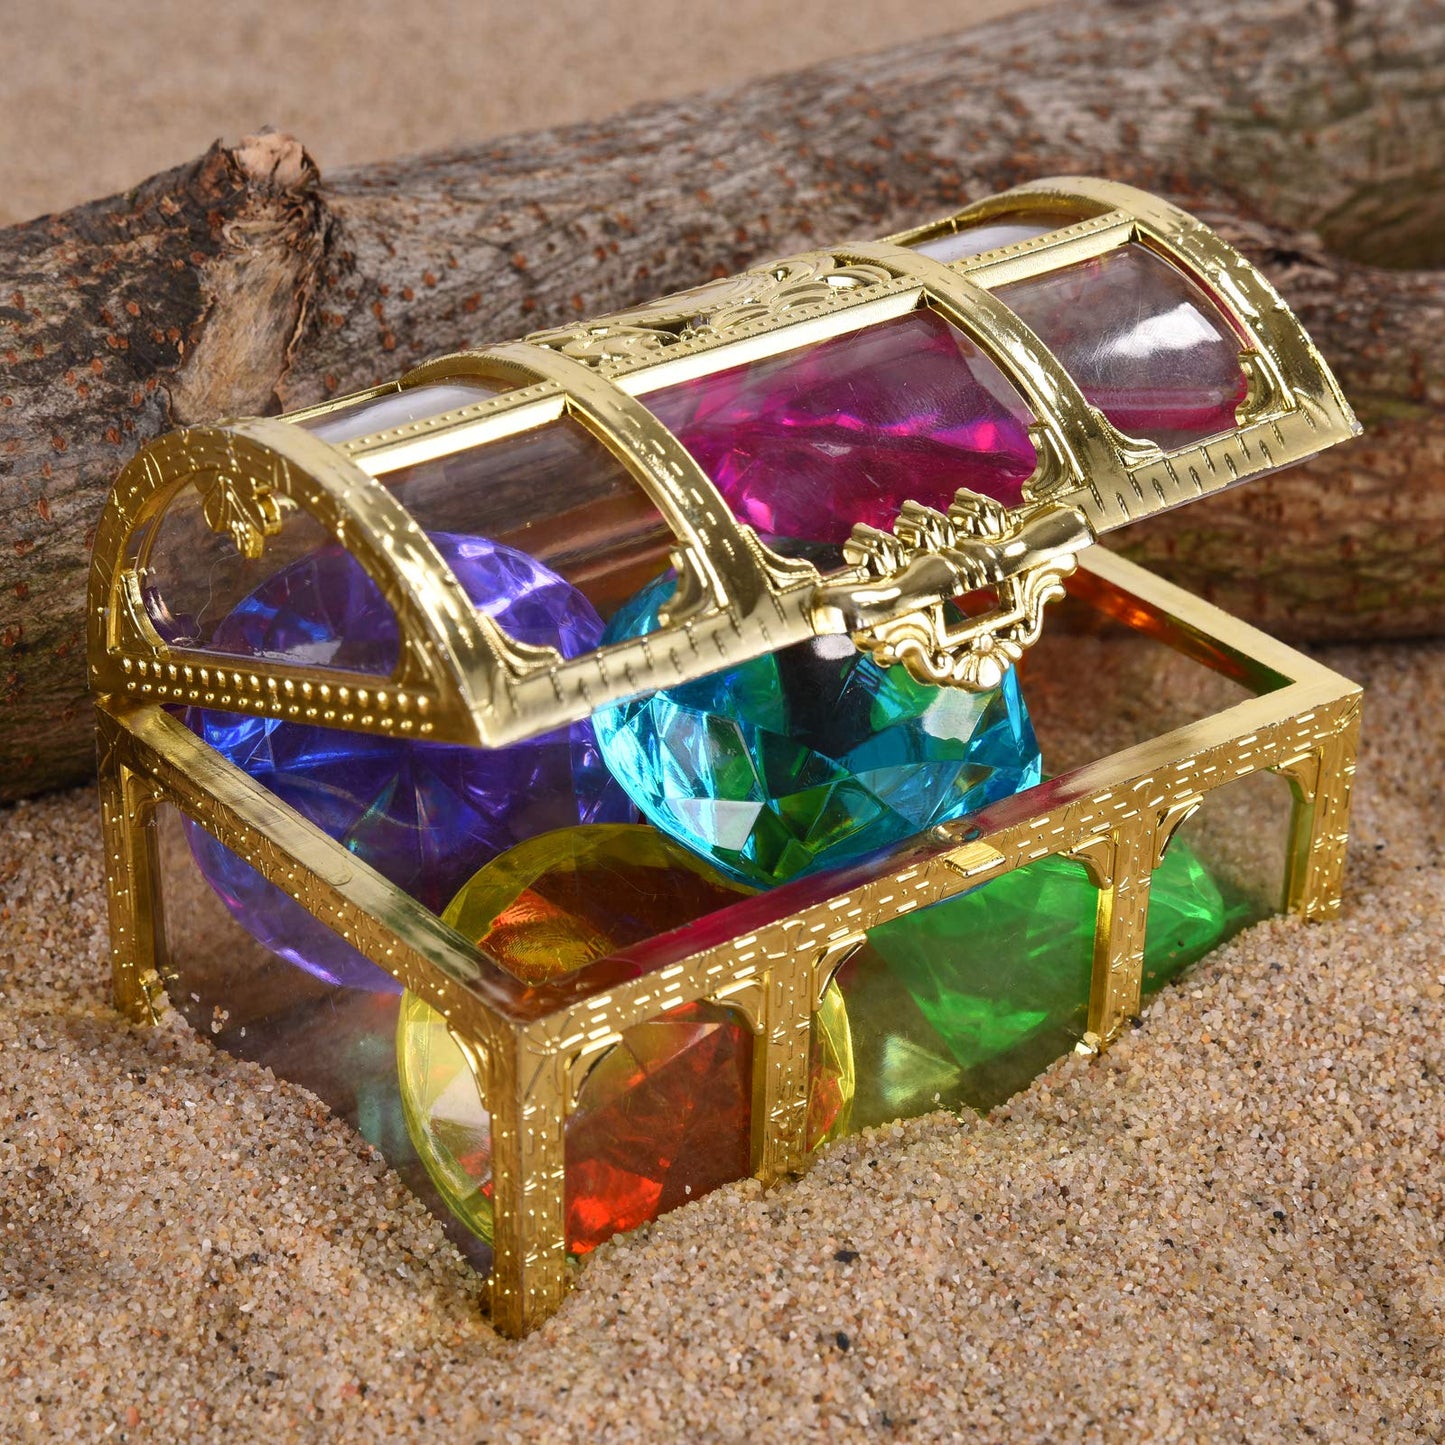 Diving Gem Pool Toy 6 Big Colorful Diamonds Set with Treasure Pirate Box Summer Swimming Gem Diving Toys Set Dive Throw Toy Set Underwater Swimming Toy for Pool Use Treasures Gift Sets (golden) Golden